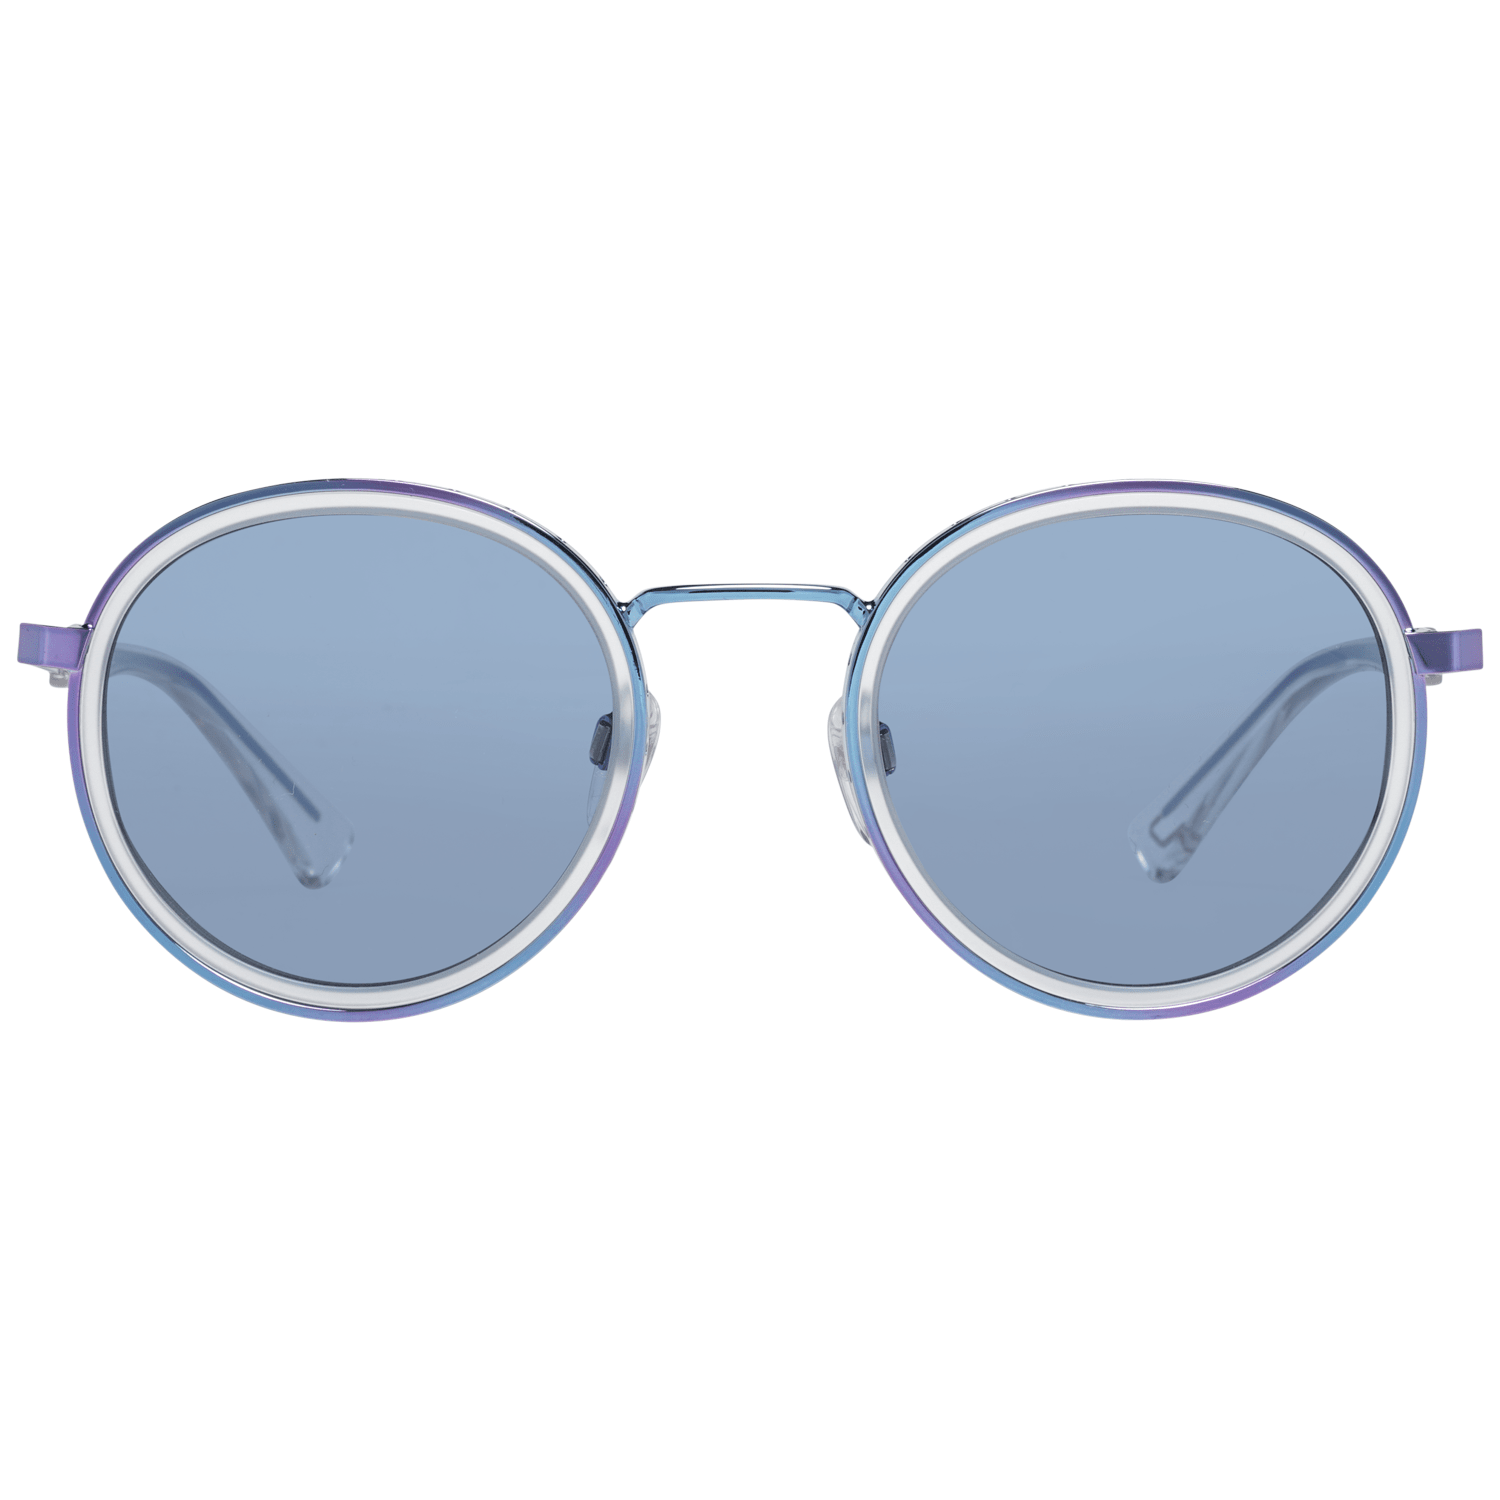 GenderUnisexMain colorBlueFrame colorBlueFrame materialMetal & PlasticLenses colorBlueLenses materialPlasticFilter category2StyleOvalLenses effectNo ExtraProtection100% UVA & UVBSize49-23-145Lenses width49mmLenses height44mmBridge width23mmFrame width140mmTemples length145mmShipment includesCase, cleaning clothSpring hingeNo